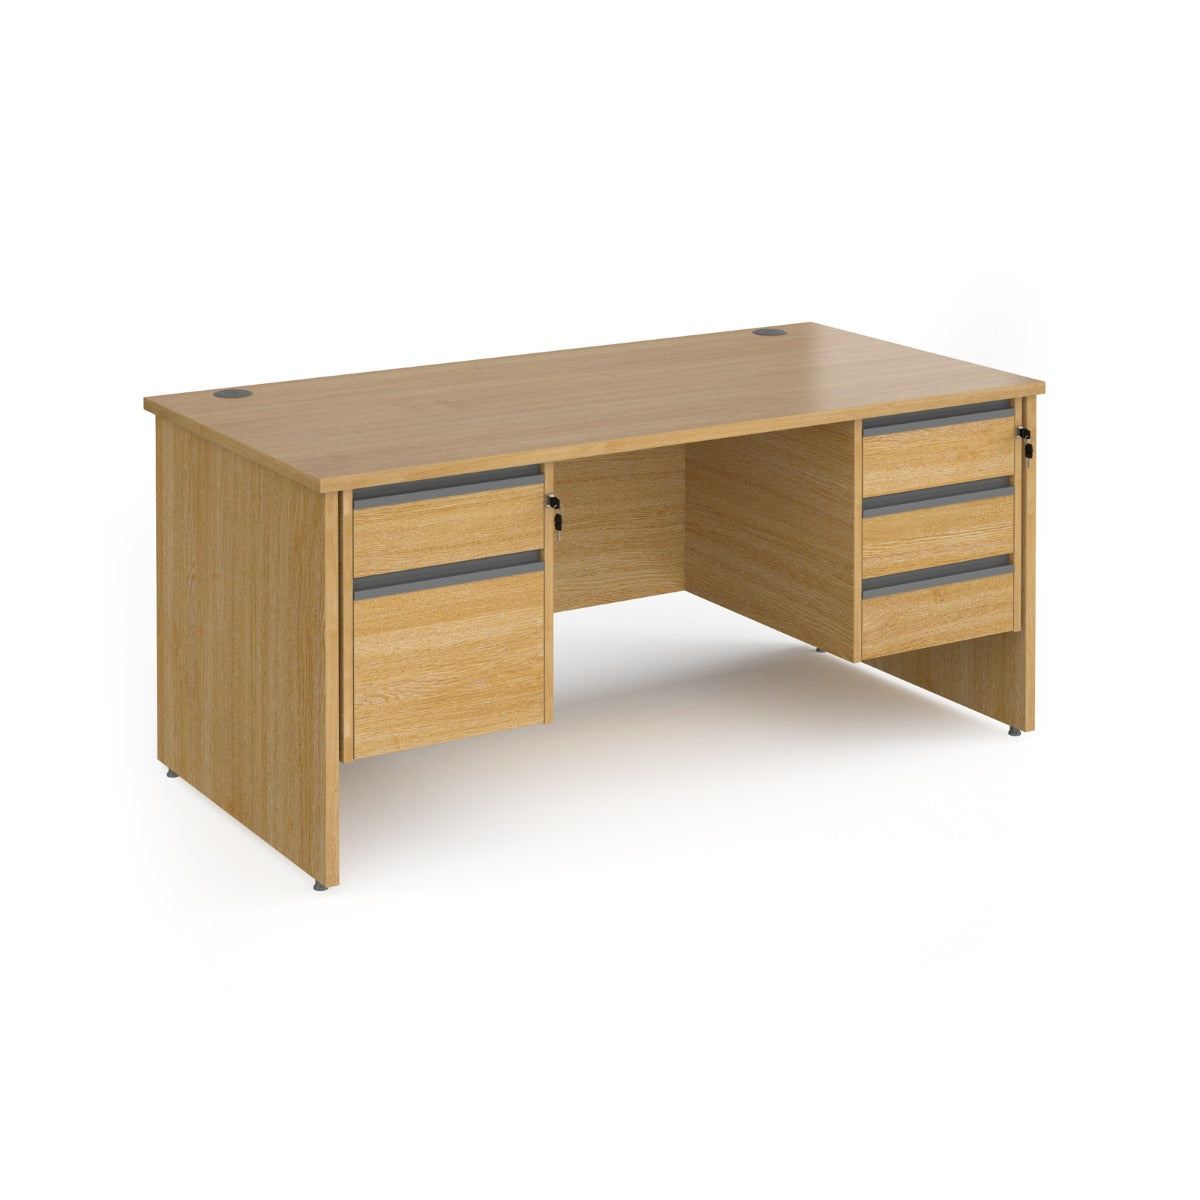 Contract Panel Leg Straight Office Desk with Two & Three Drawer Storage